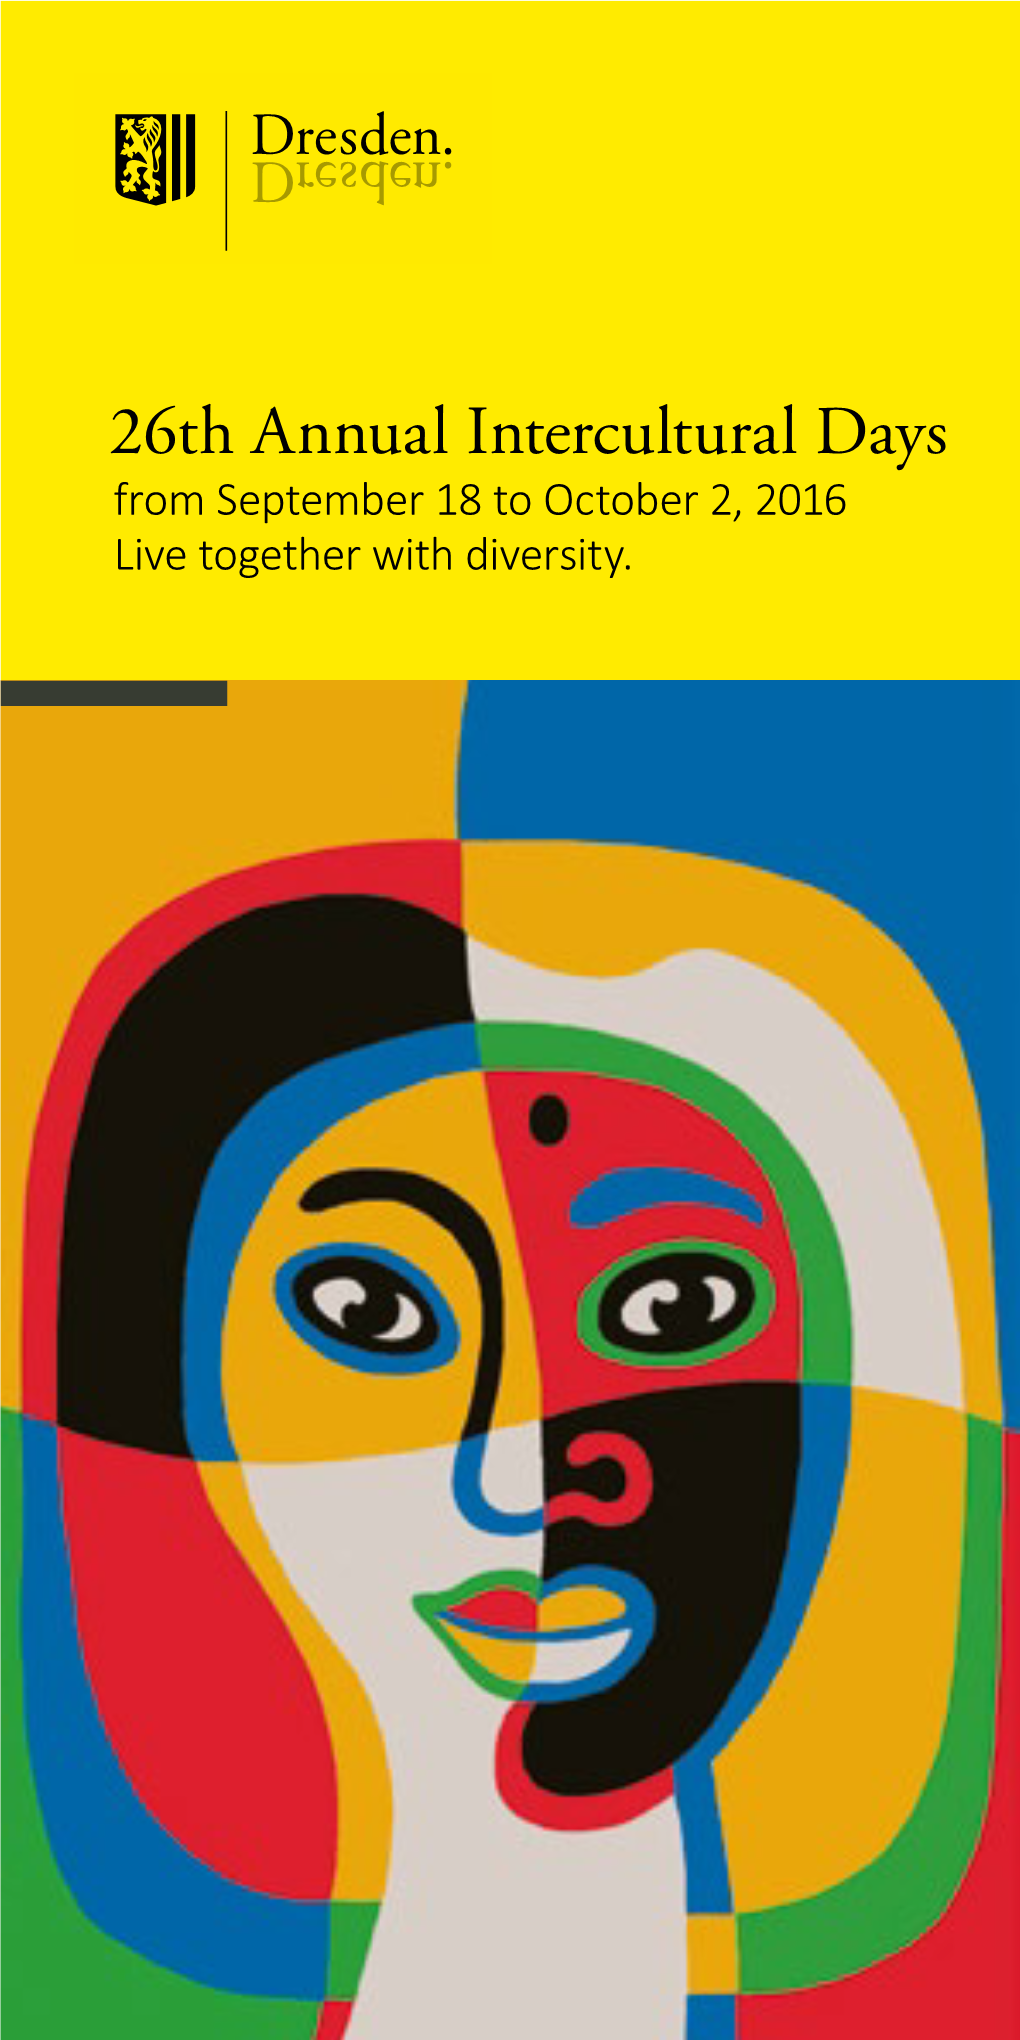 26Th Annual Intercultural Days from September 18 to October 2, 2016 Live Together with Diversity